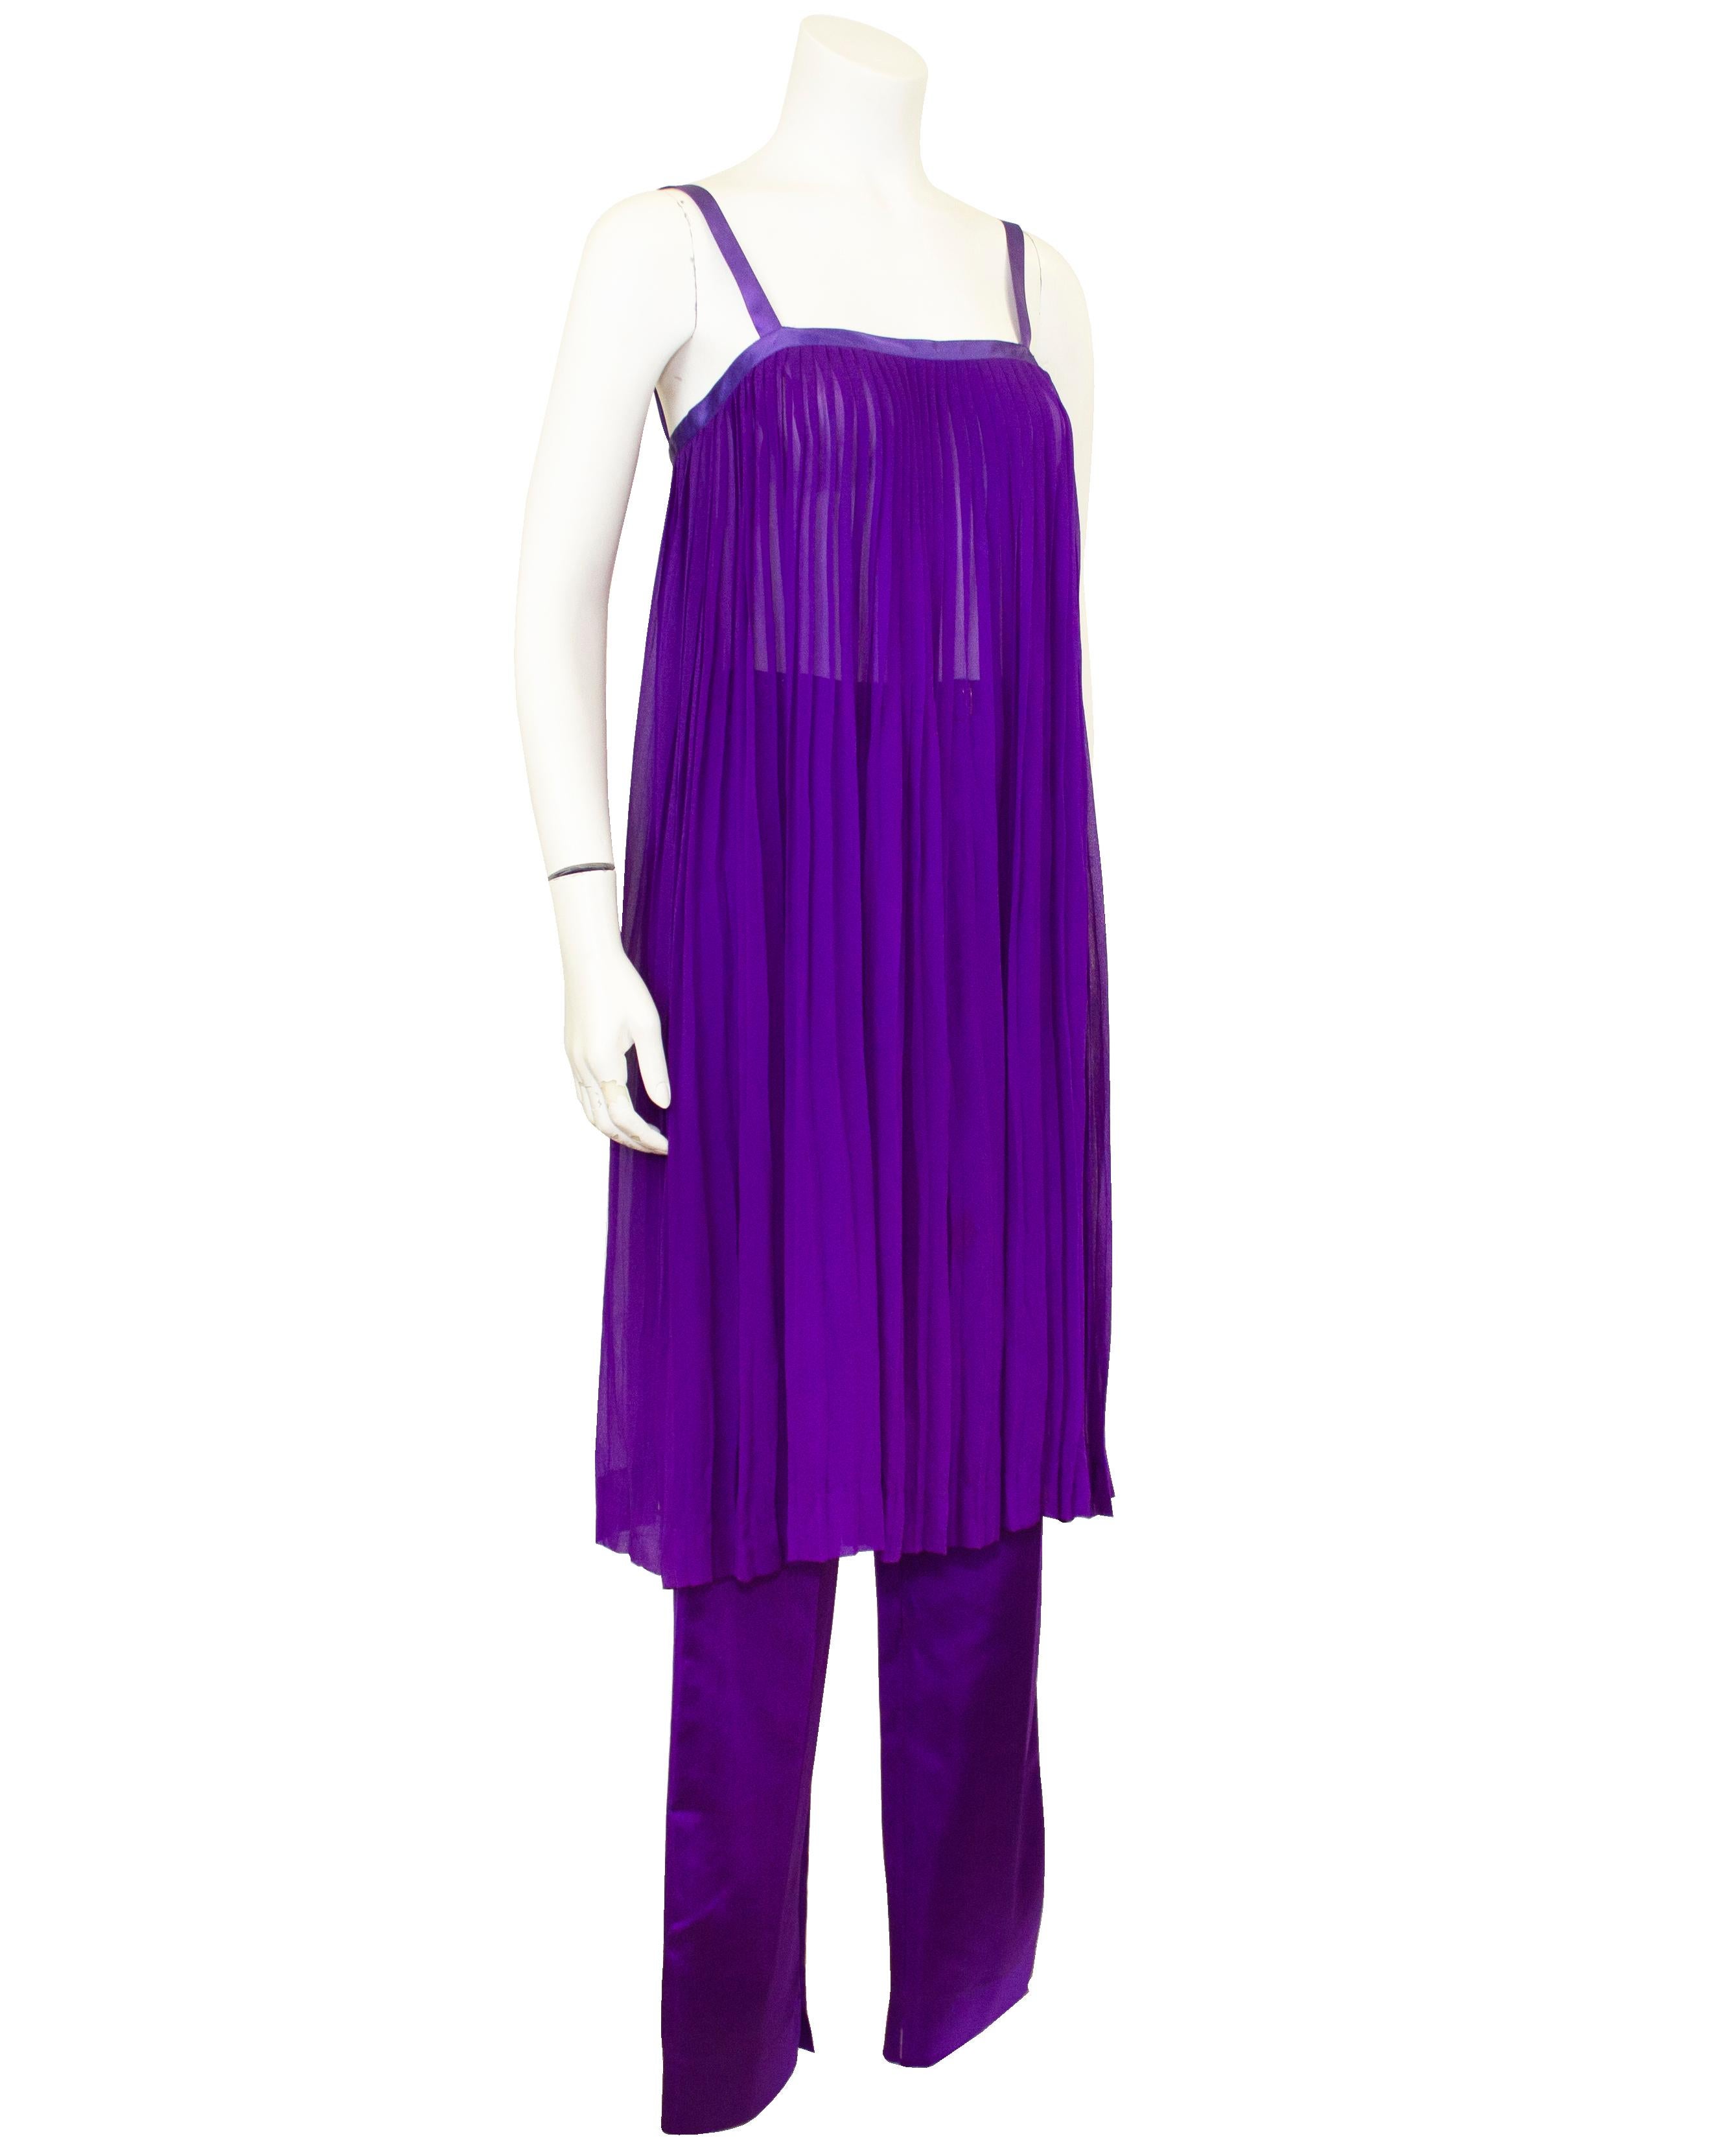 Vibrant jewel toned ensemble from Yves Saint Laurent’s “High Seas Chic” RTW Spring 1978 collection. Purple pleated silk georgette sleeveless tunic with matching purple satin trim. Silk satin high waisted straight plated leg pants. Belt waist on